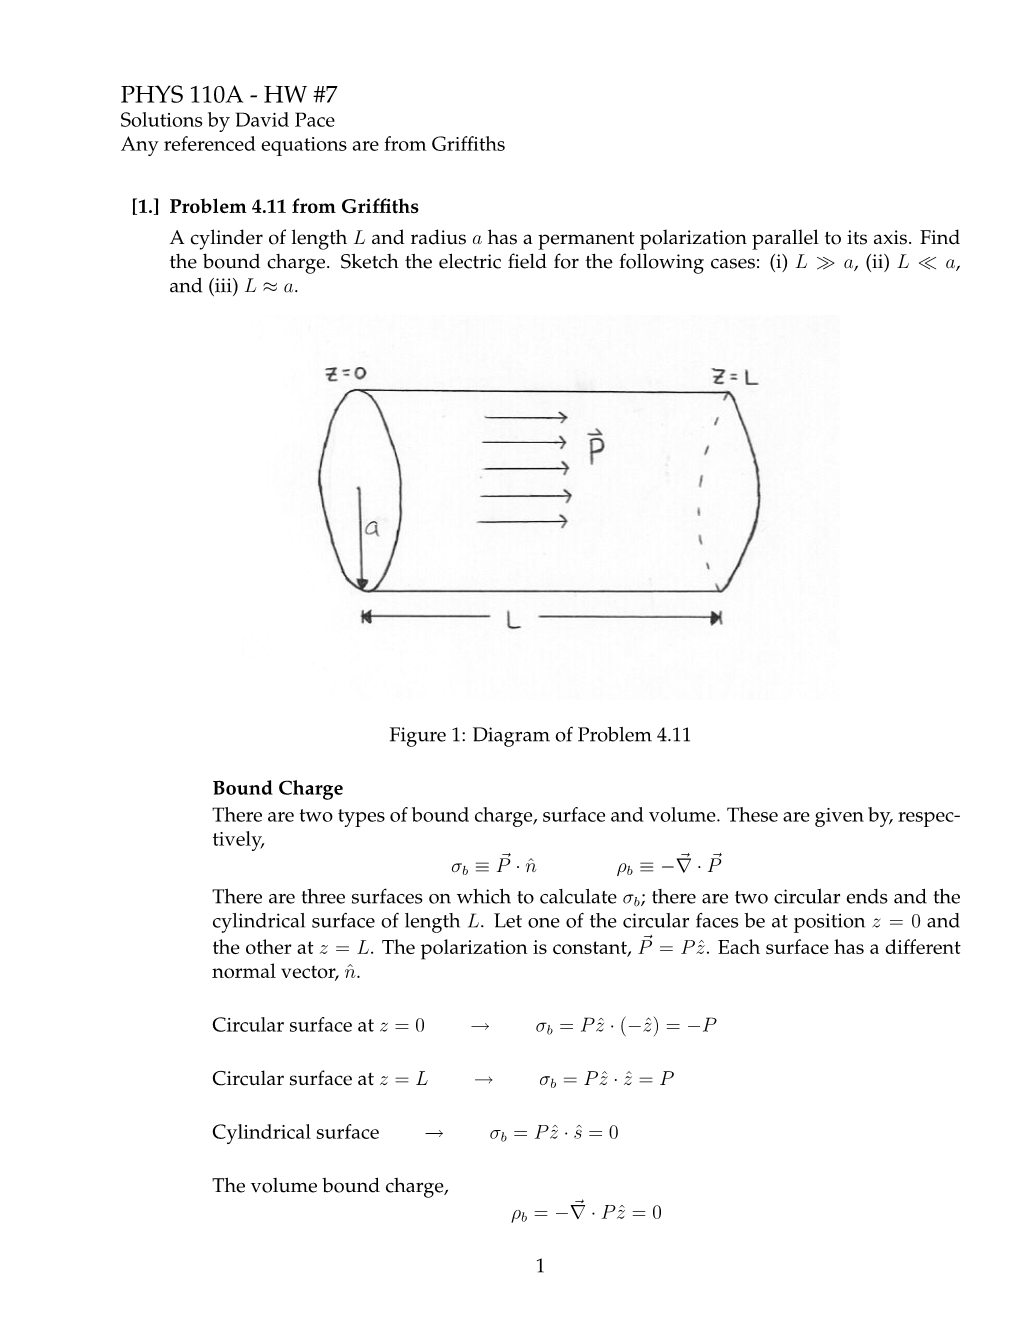 PHYS 110A - HW #7 Solutions by David Pace Any Referenced Equations Are from Grifﬁths